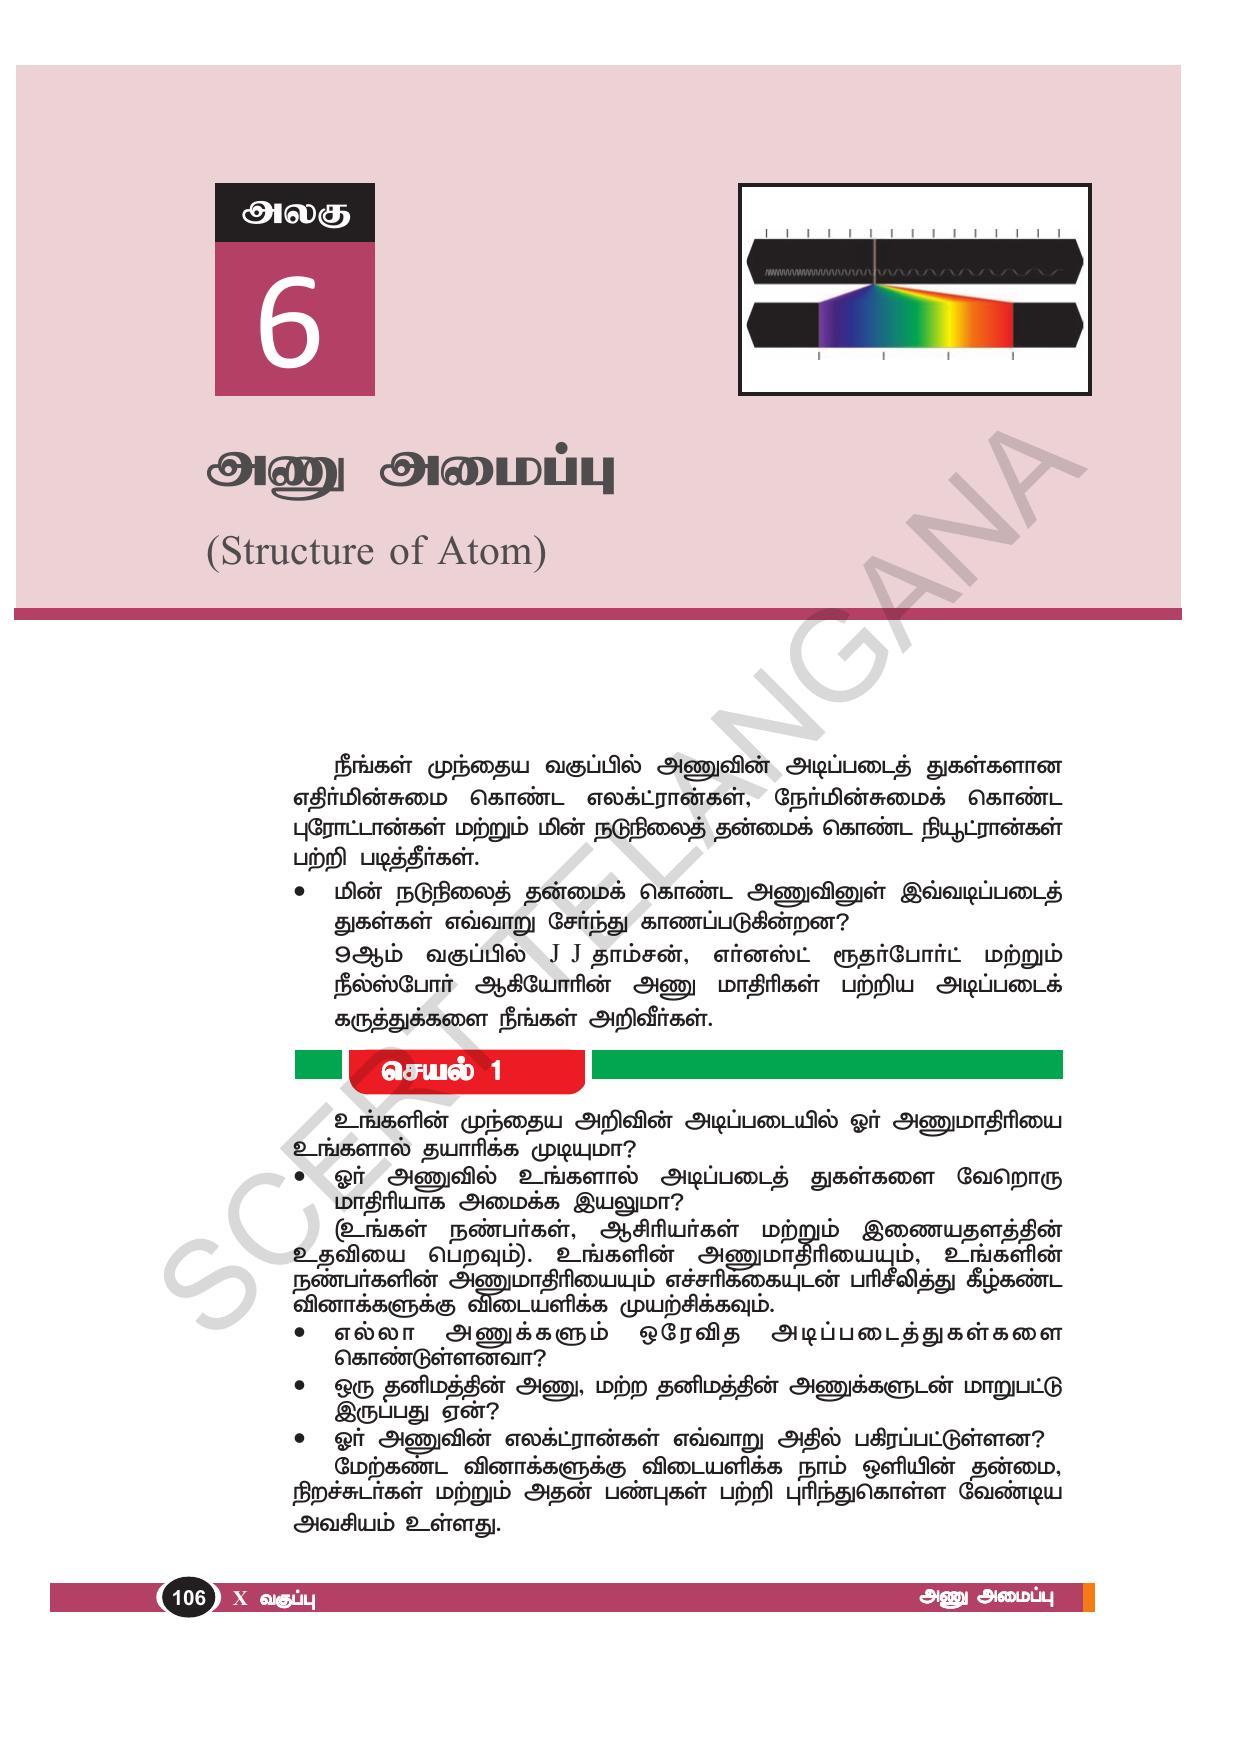 TS SCERT Class 10 Physical Science(Tamil Medium) Text Book - Page 118